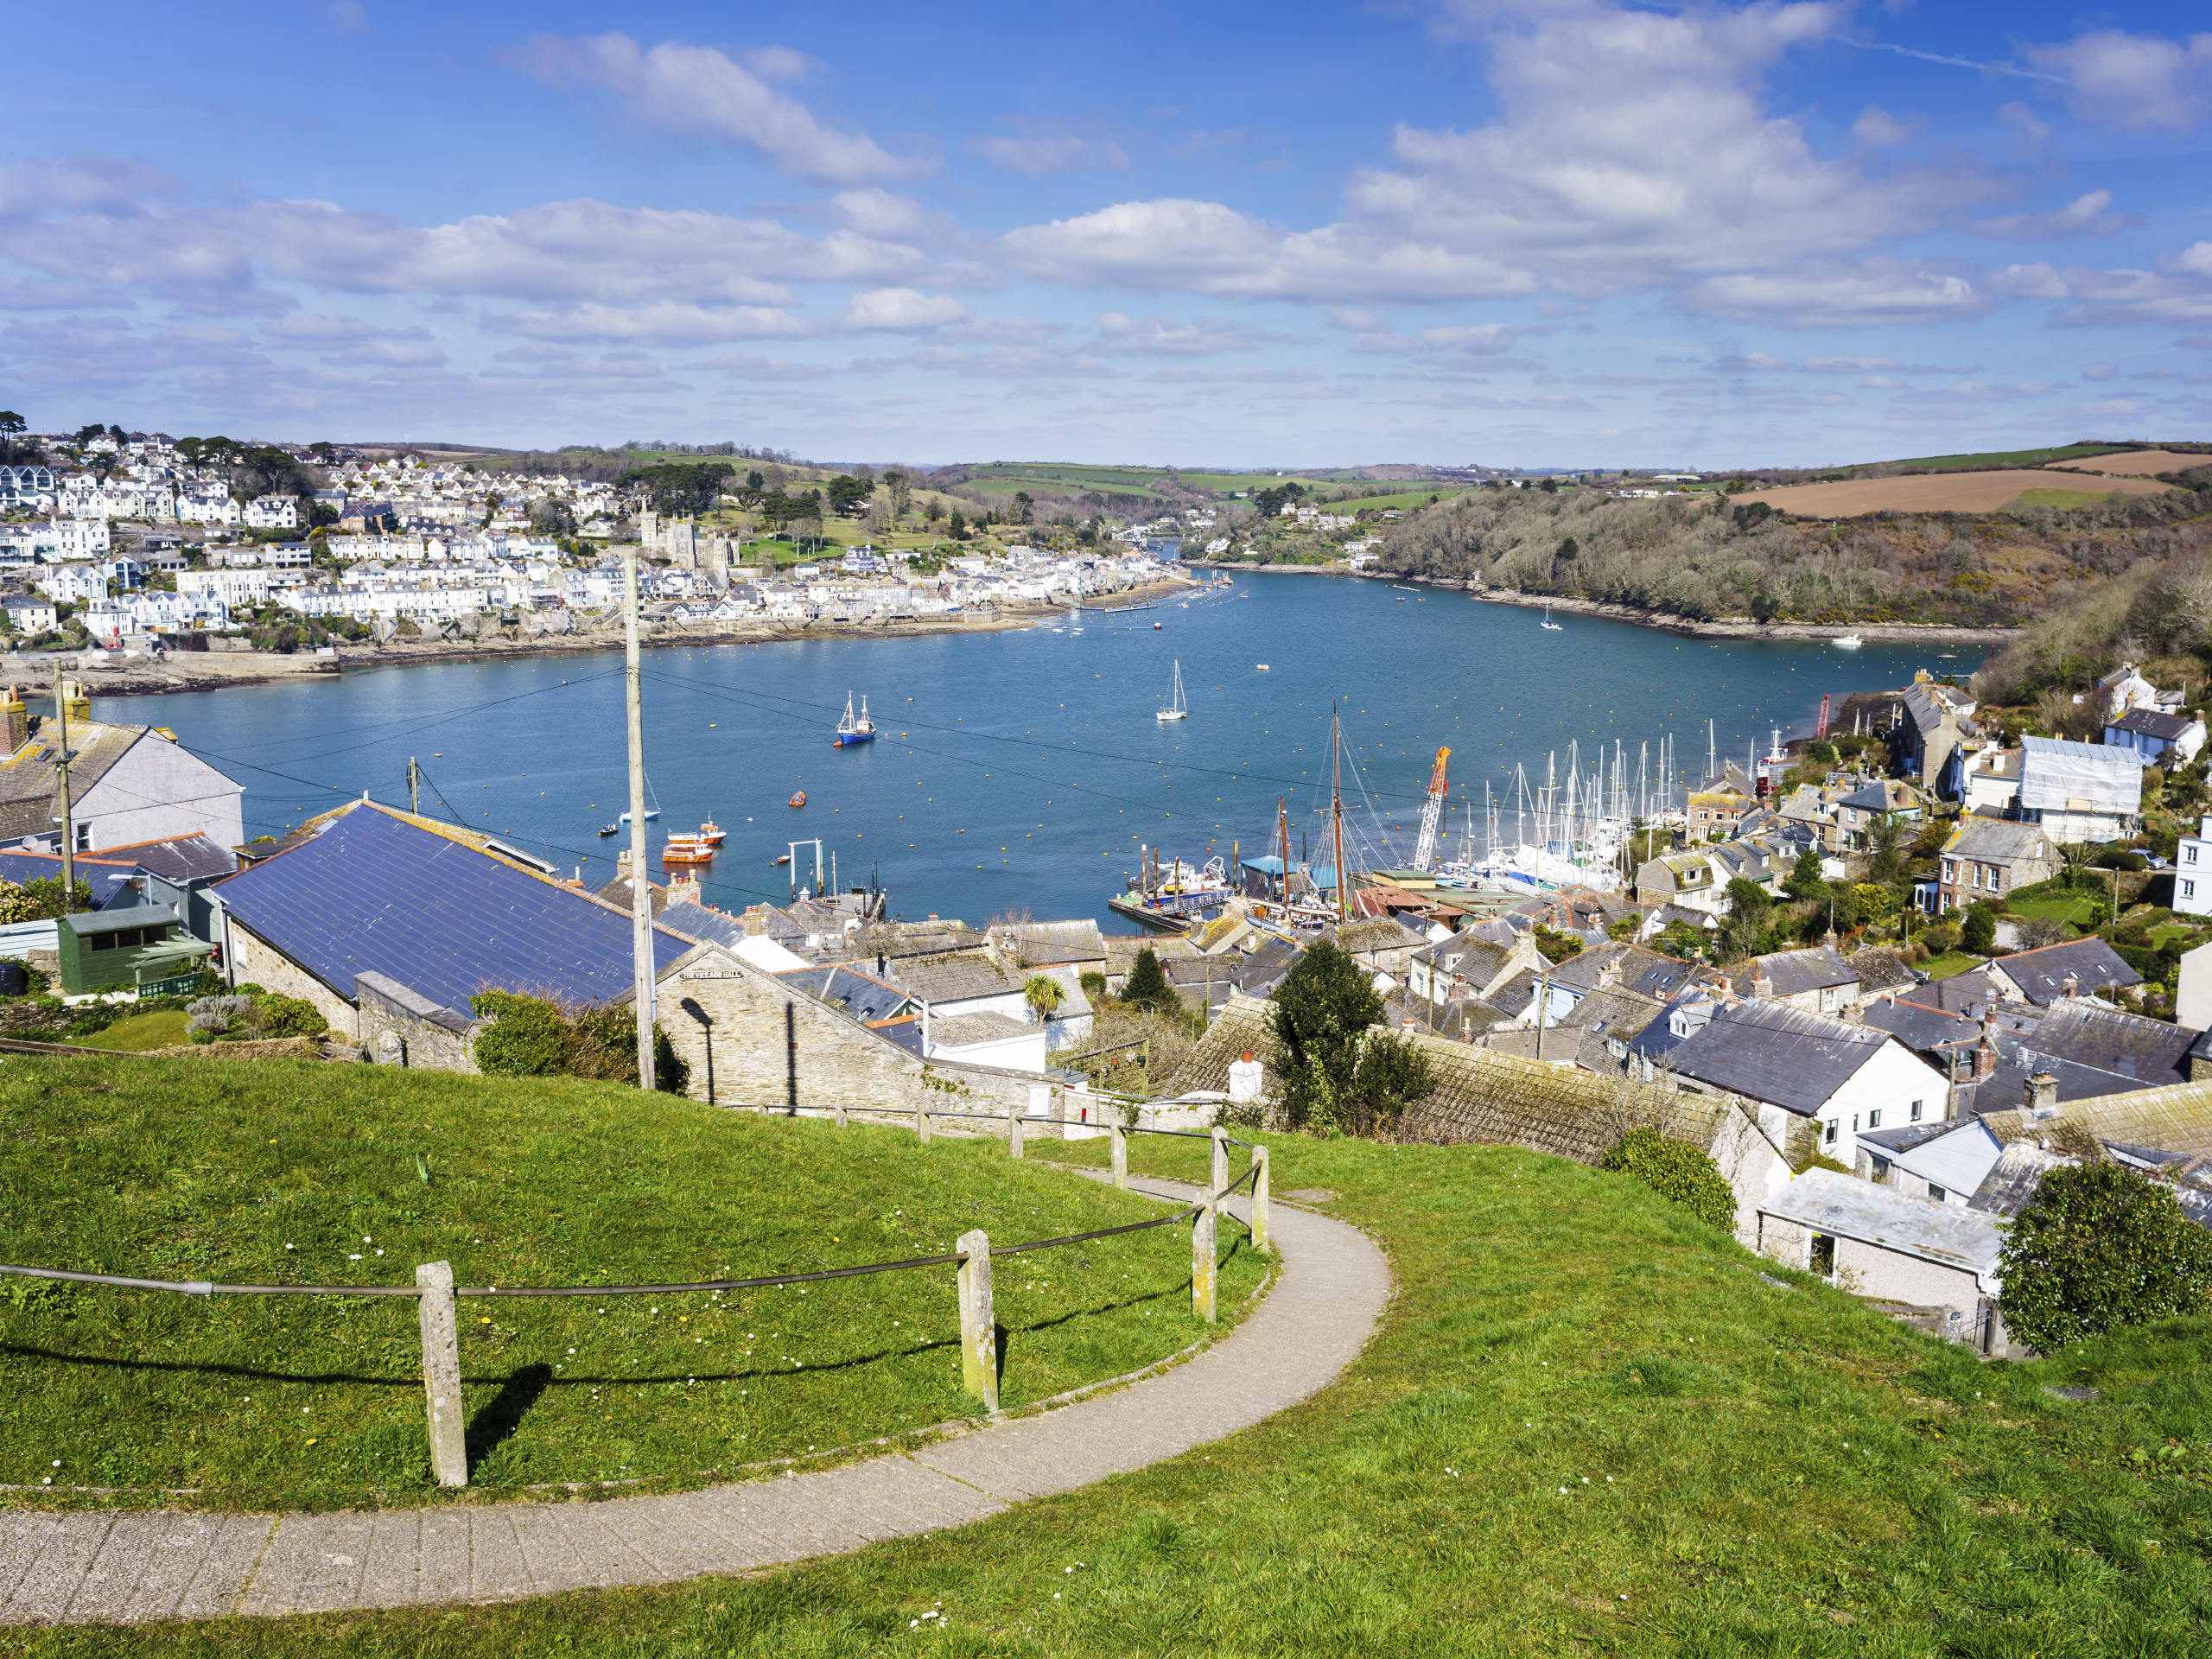 Kick back, relax and recharge your batteries in peaceful, perfect Cornwall